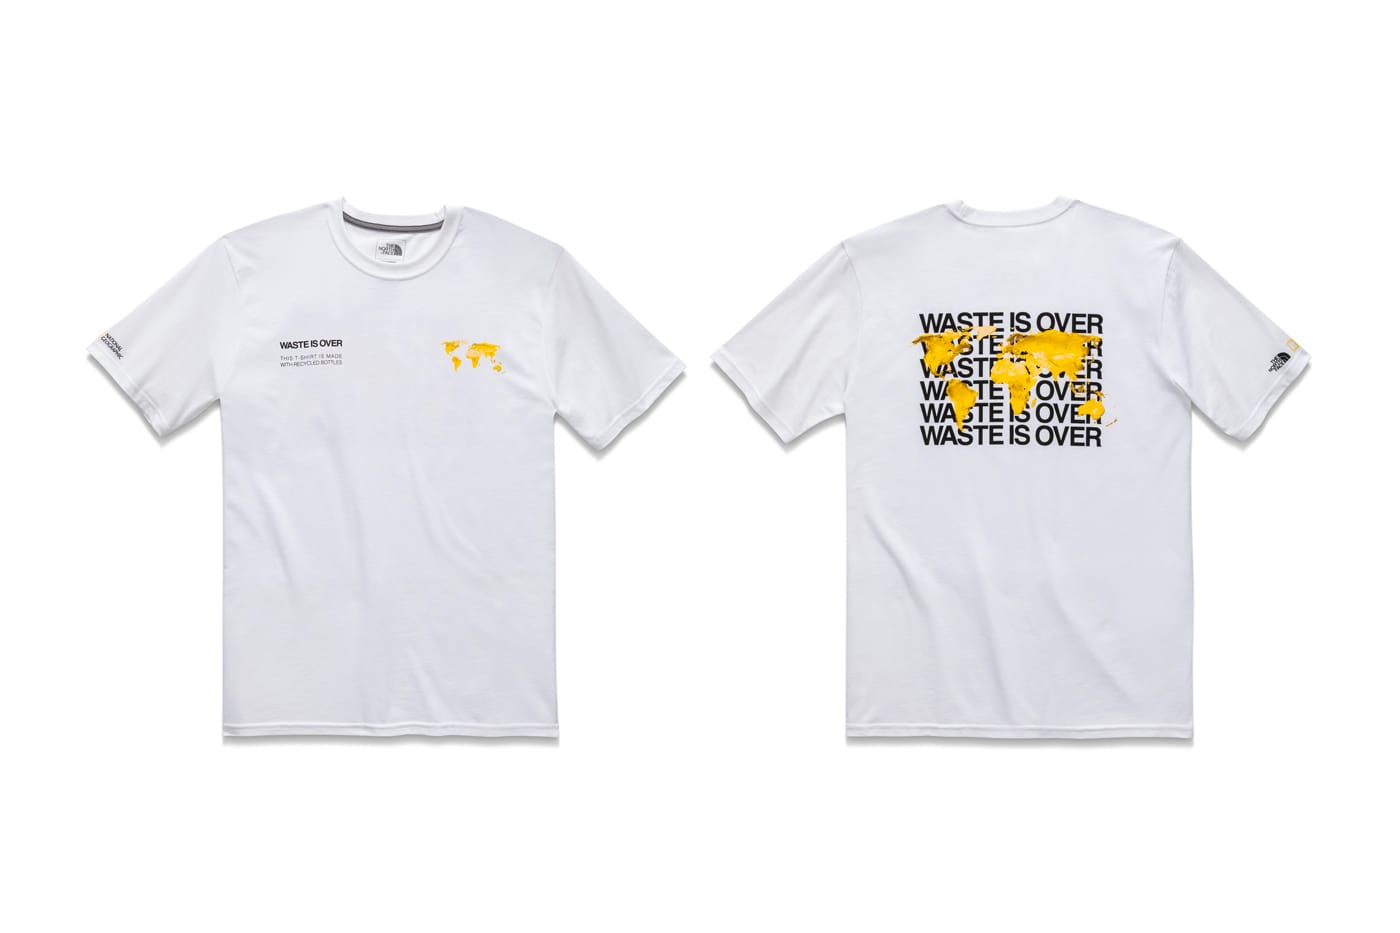 north face national geographic shirt